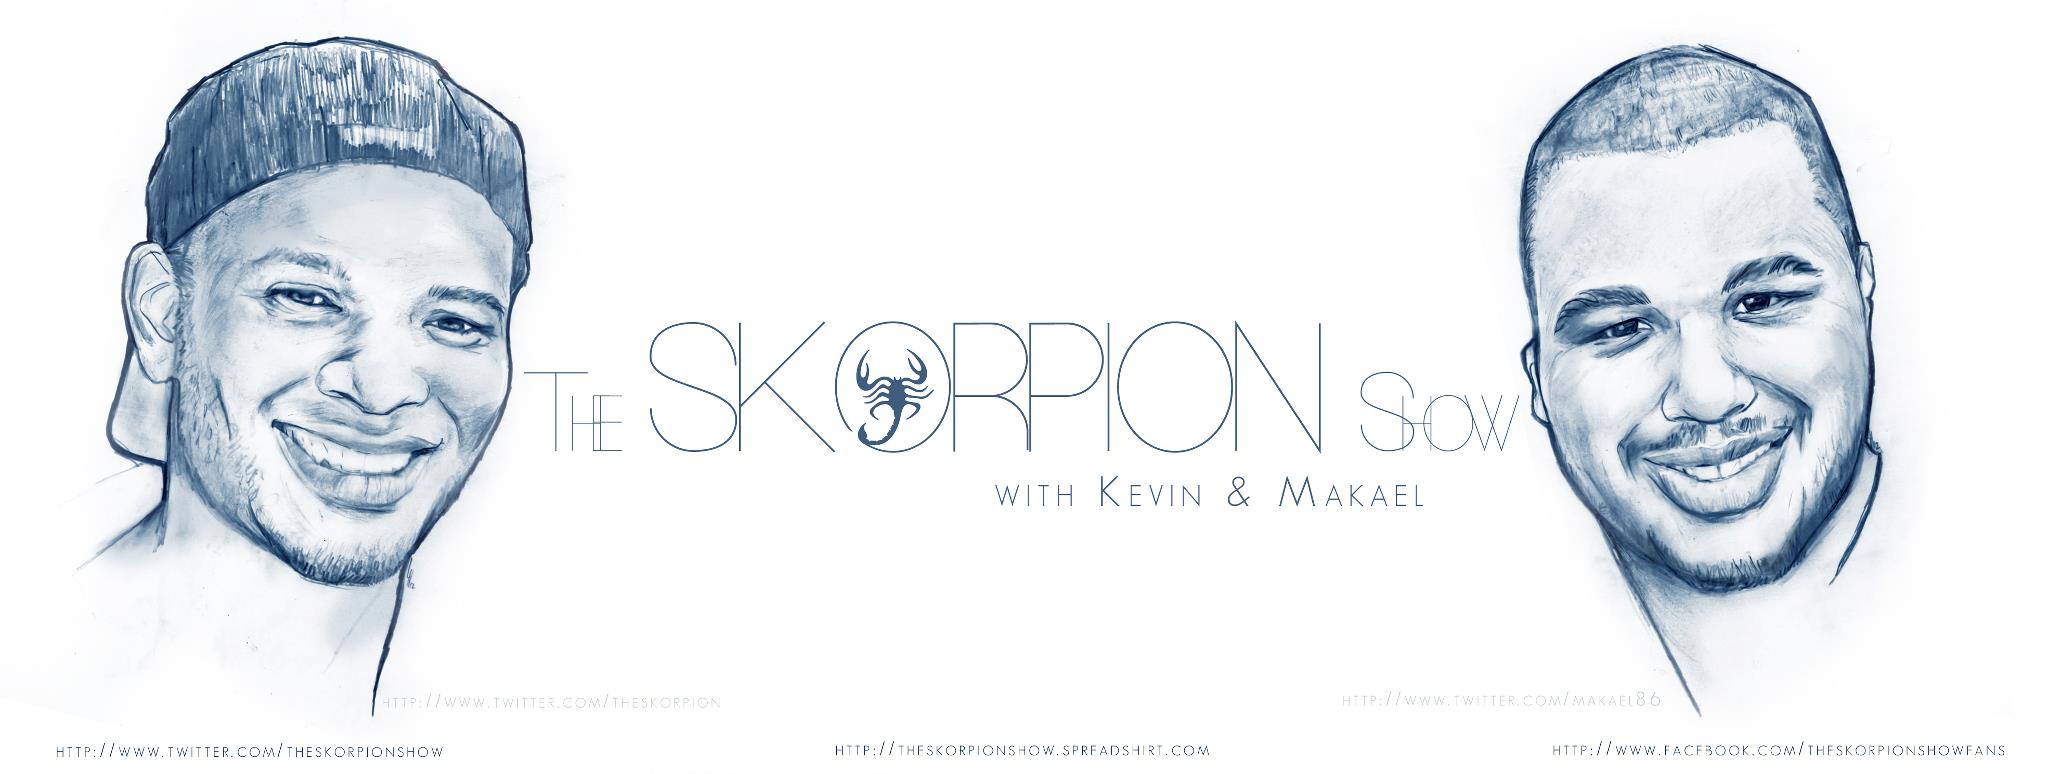 (L-R) Co-Hosts Makael Mclendon and Kevin Simmons of The Skorpion Show.